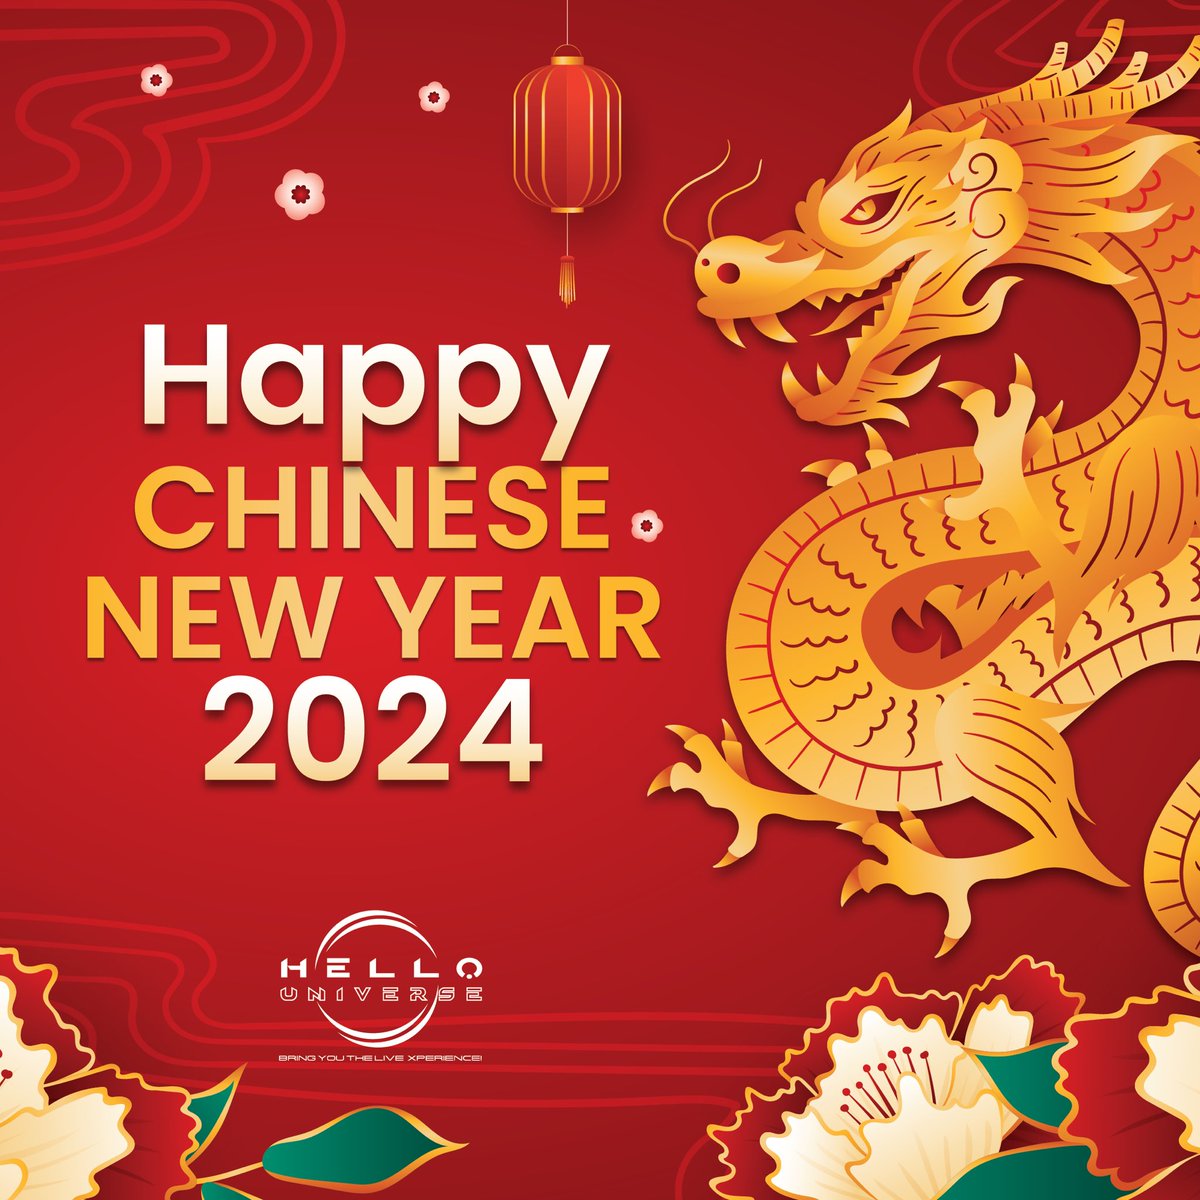 May the Year of the Dragon be filled with confidence and courage. Wishing you all prosperity and joy.

Happy Chinese New Year from HELLO UNIVERSE. 🐲 

#ChineseNewYear #LunarNewYear